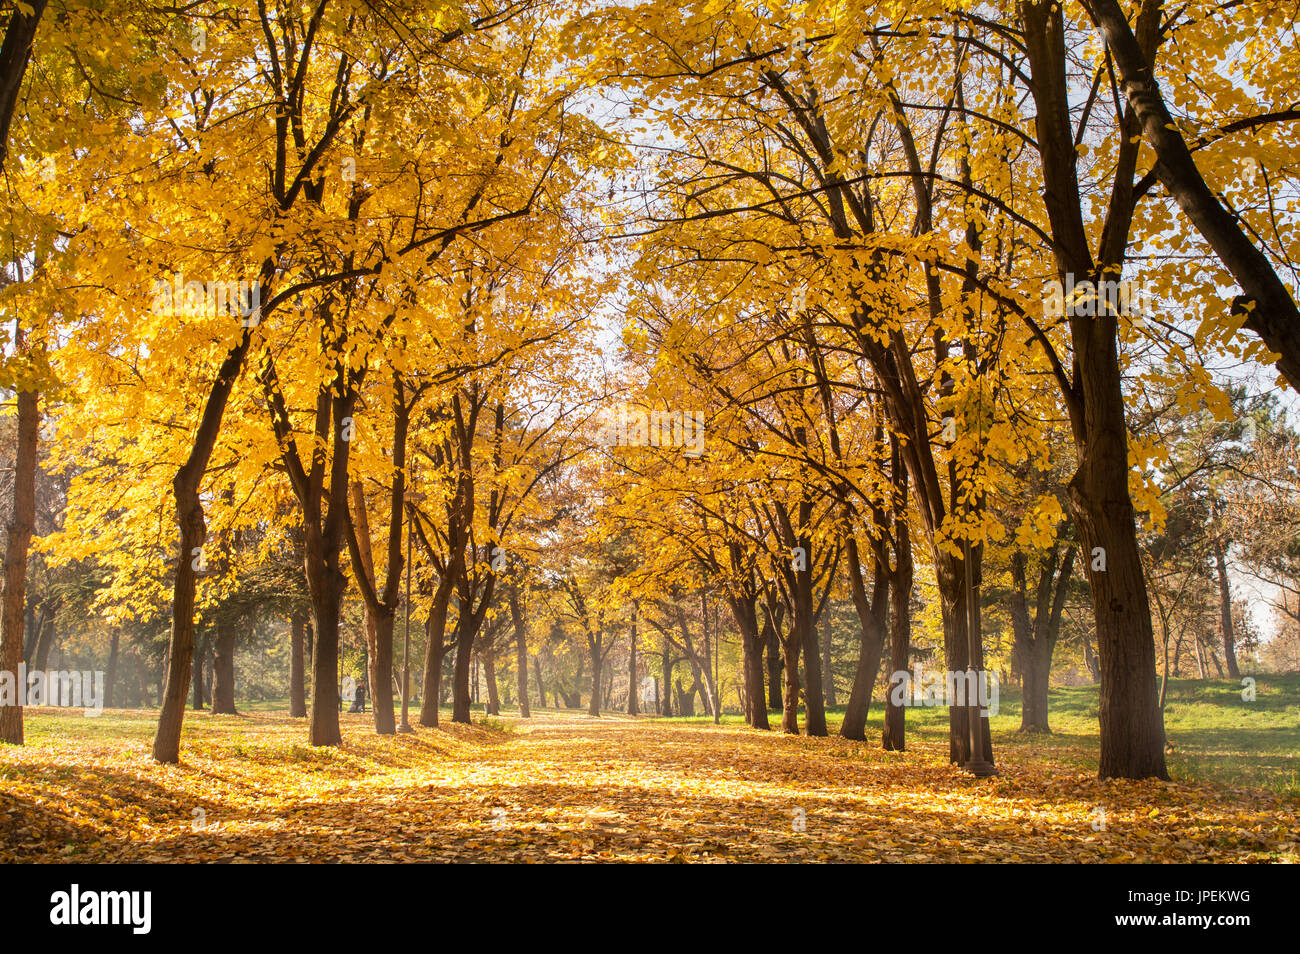 Autumn park scene of a path covered in fallen leaves Stock Photo